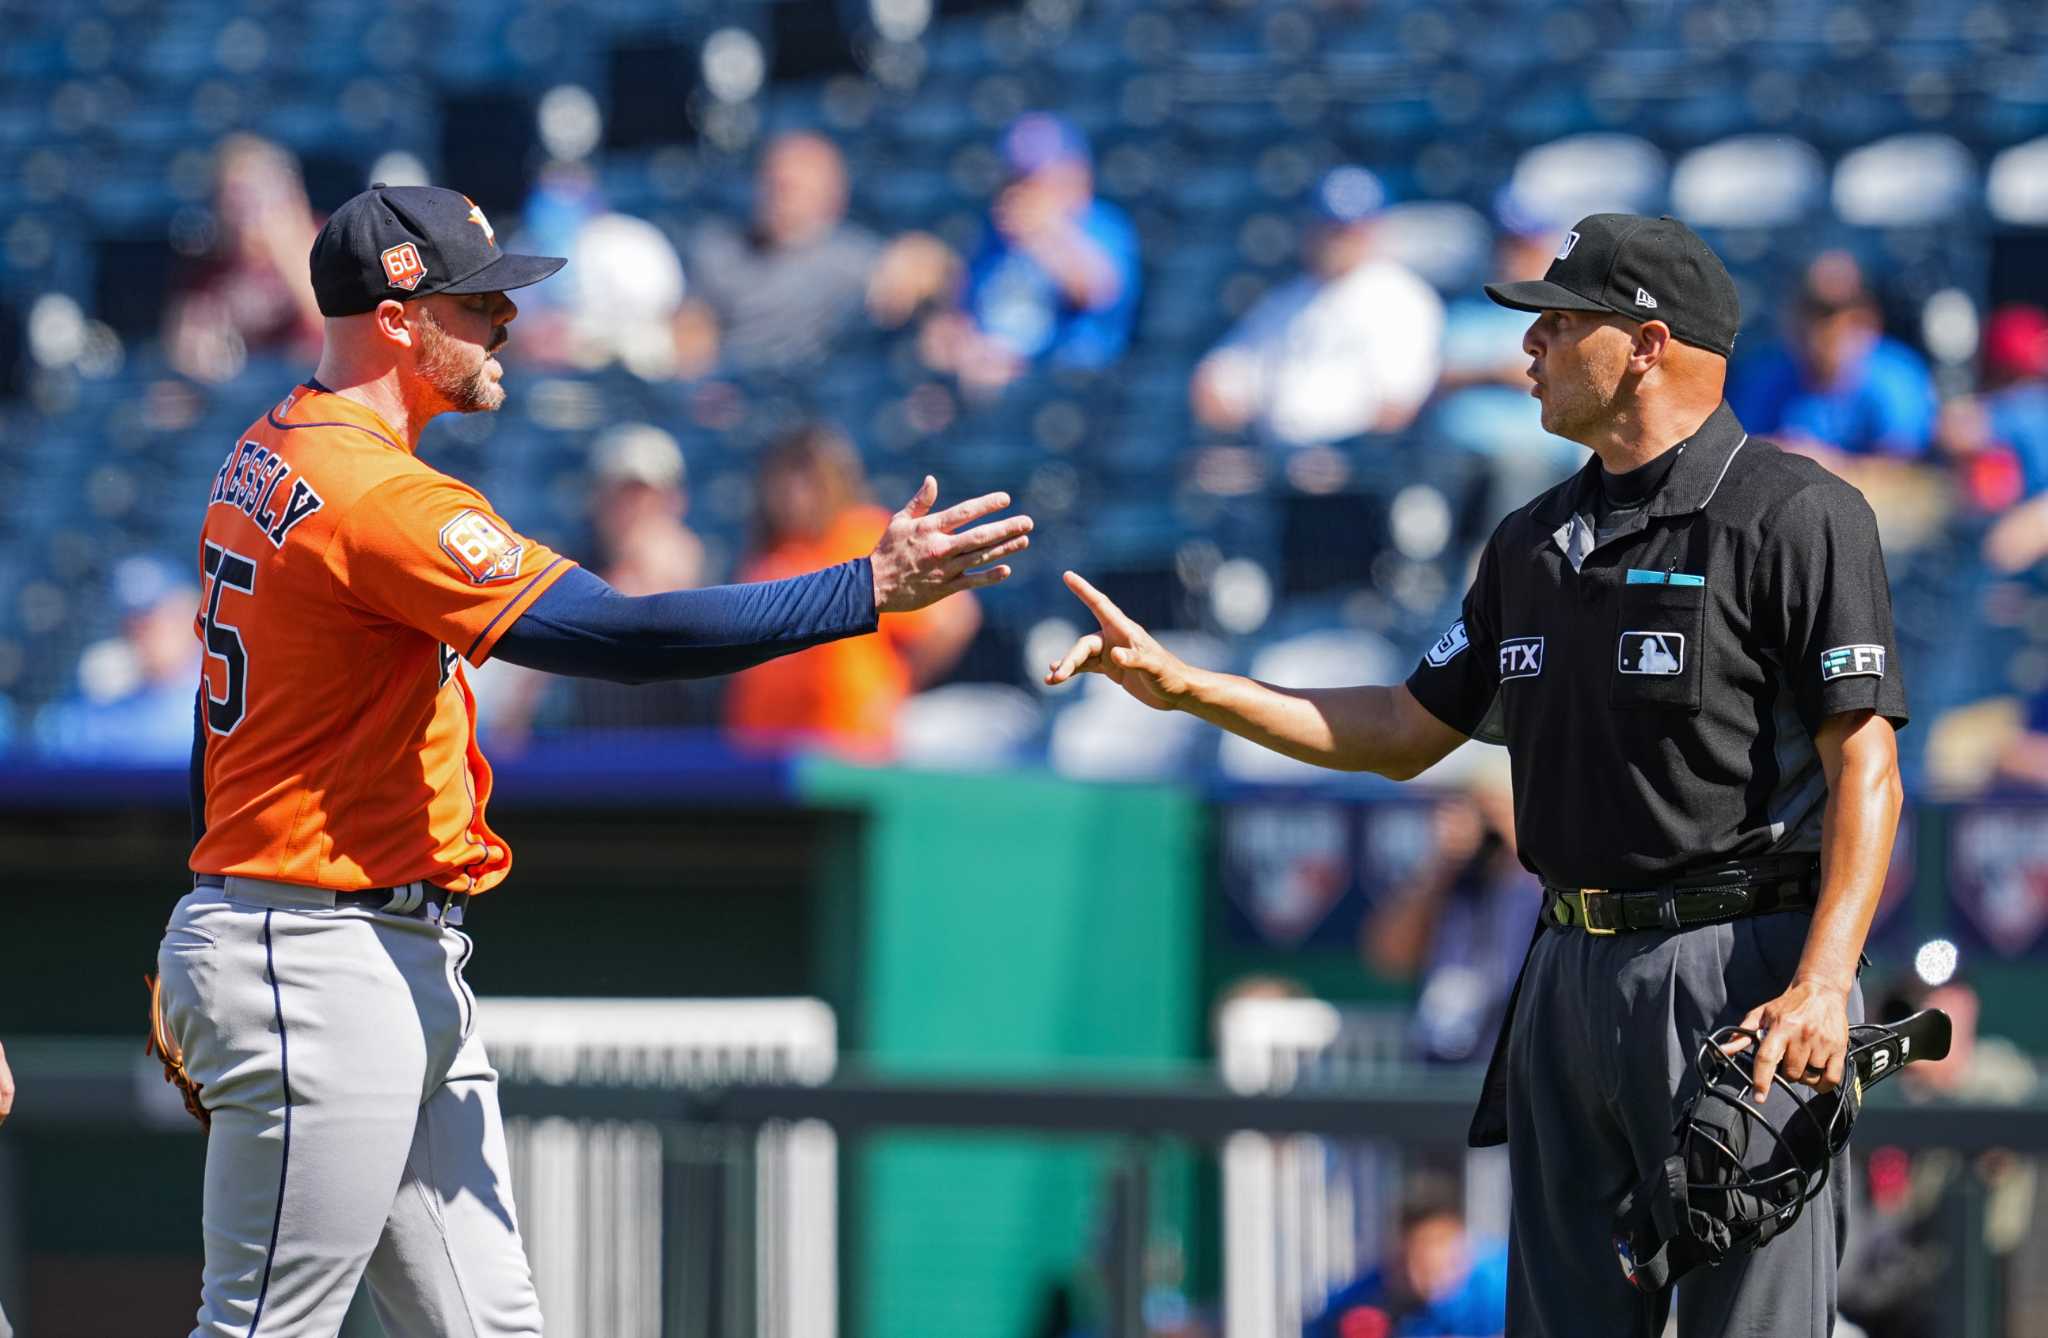 MLB umpire faces criticism after getting in face of Astros' Jeremy